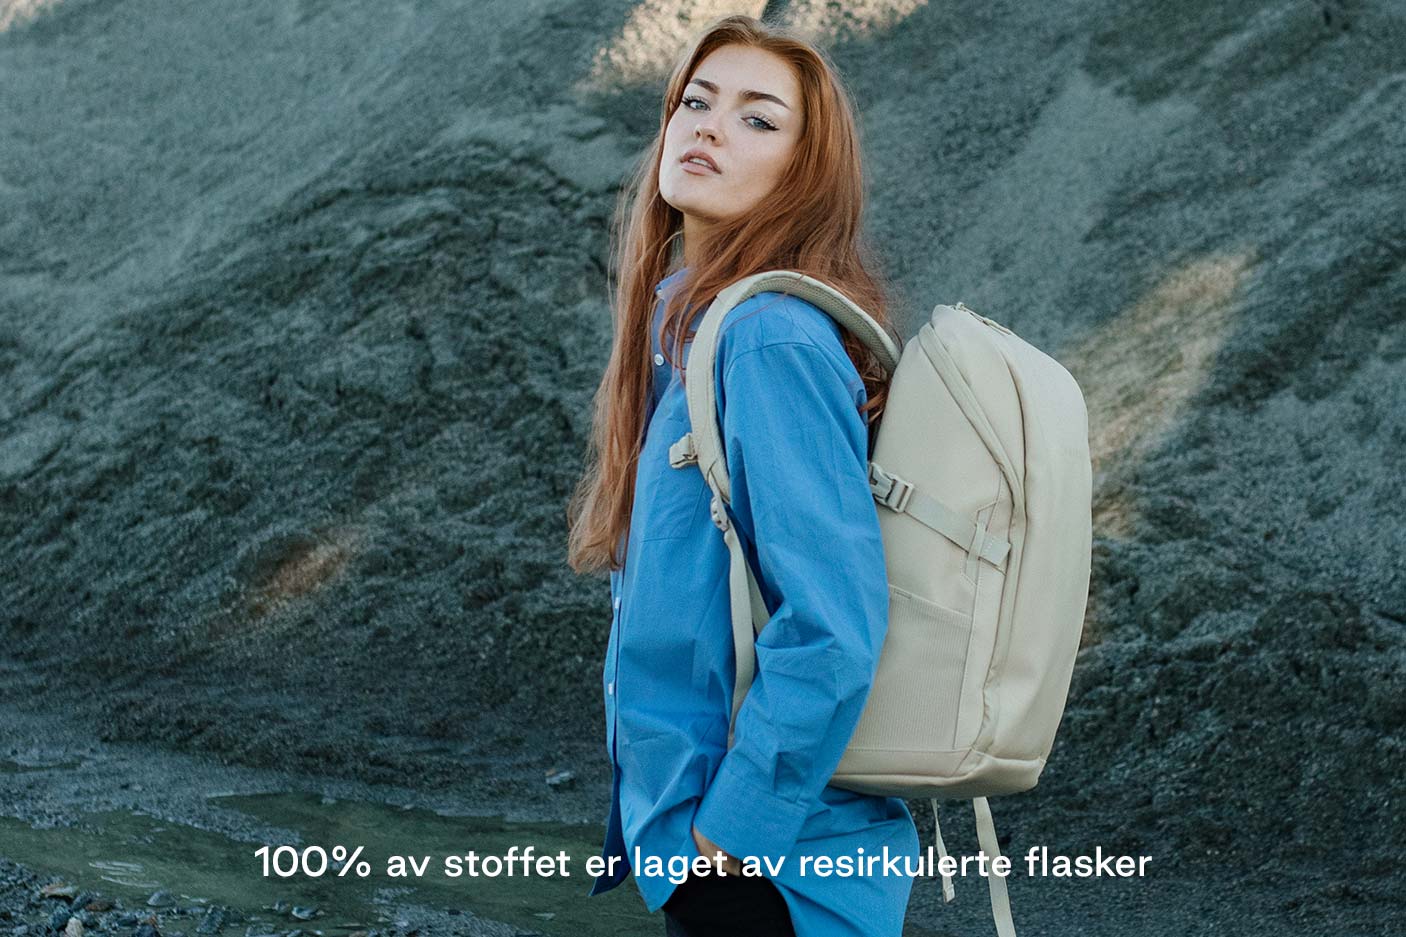 streetgo-youth-student-adult-banner-norwegian-text